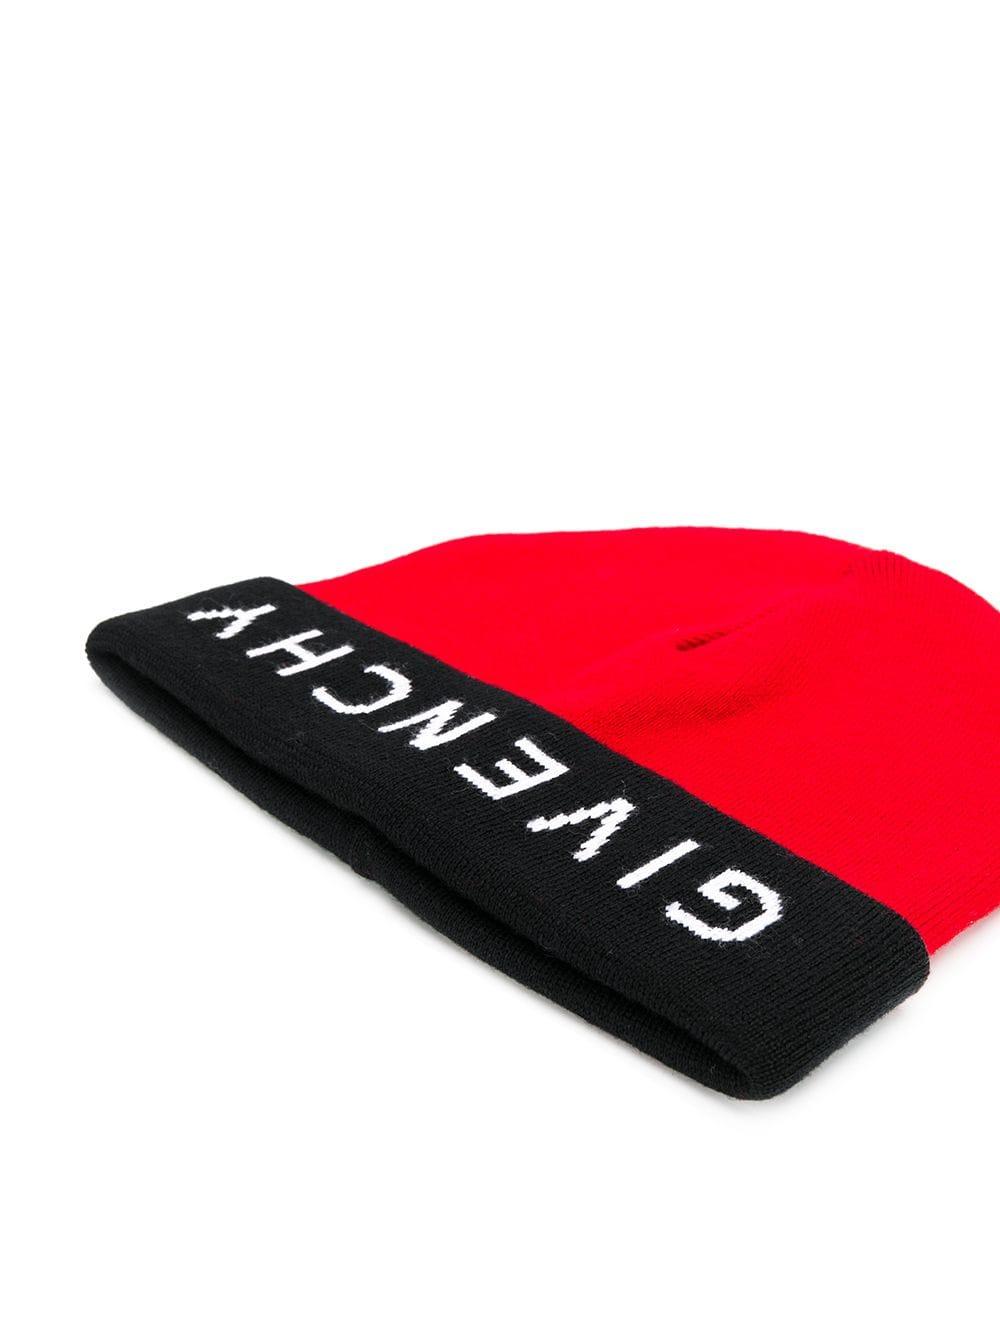 Givenchy Wool Logo Beanie Hat in Red for Men - Lyst